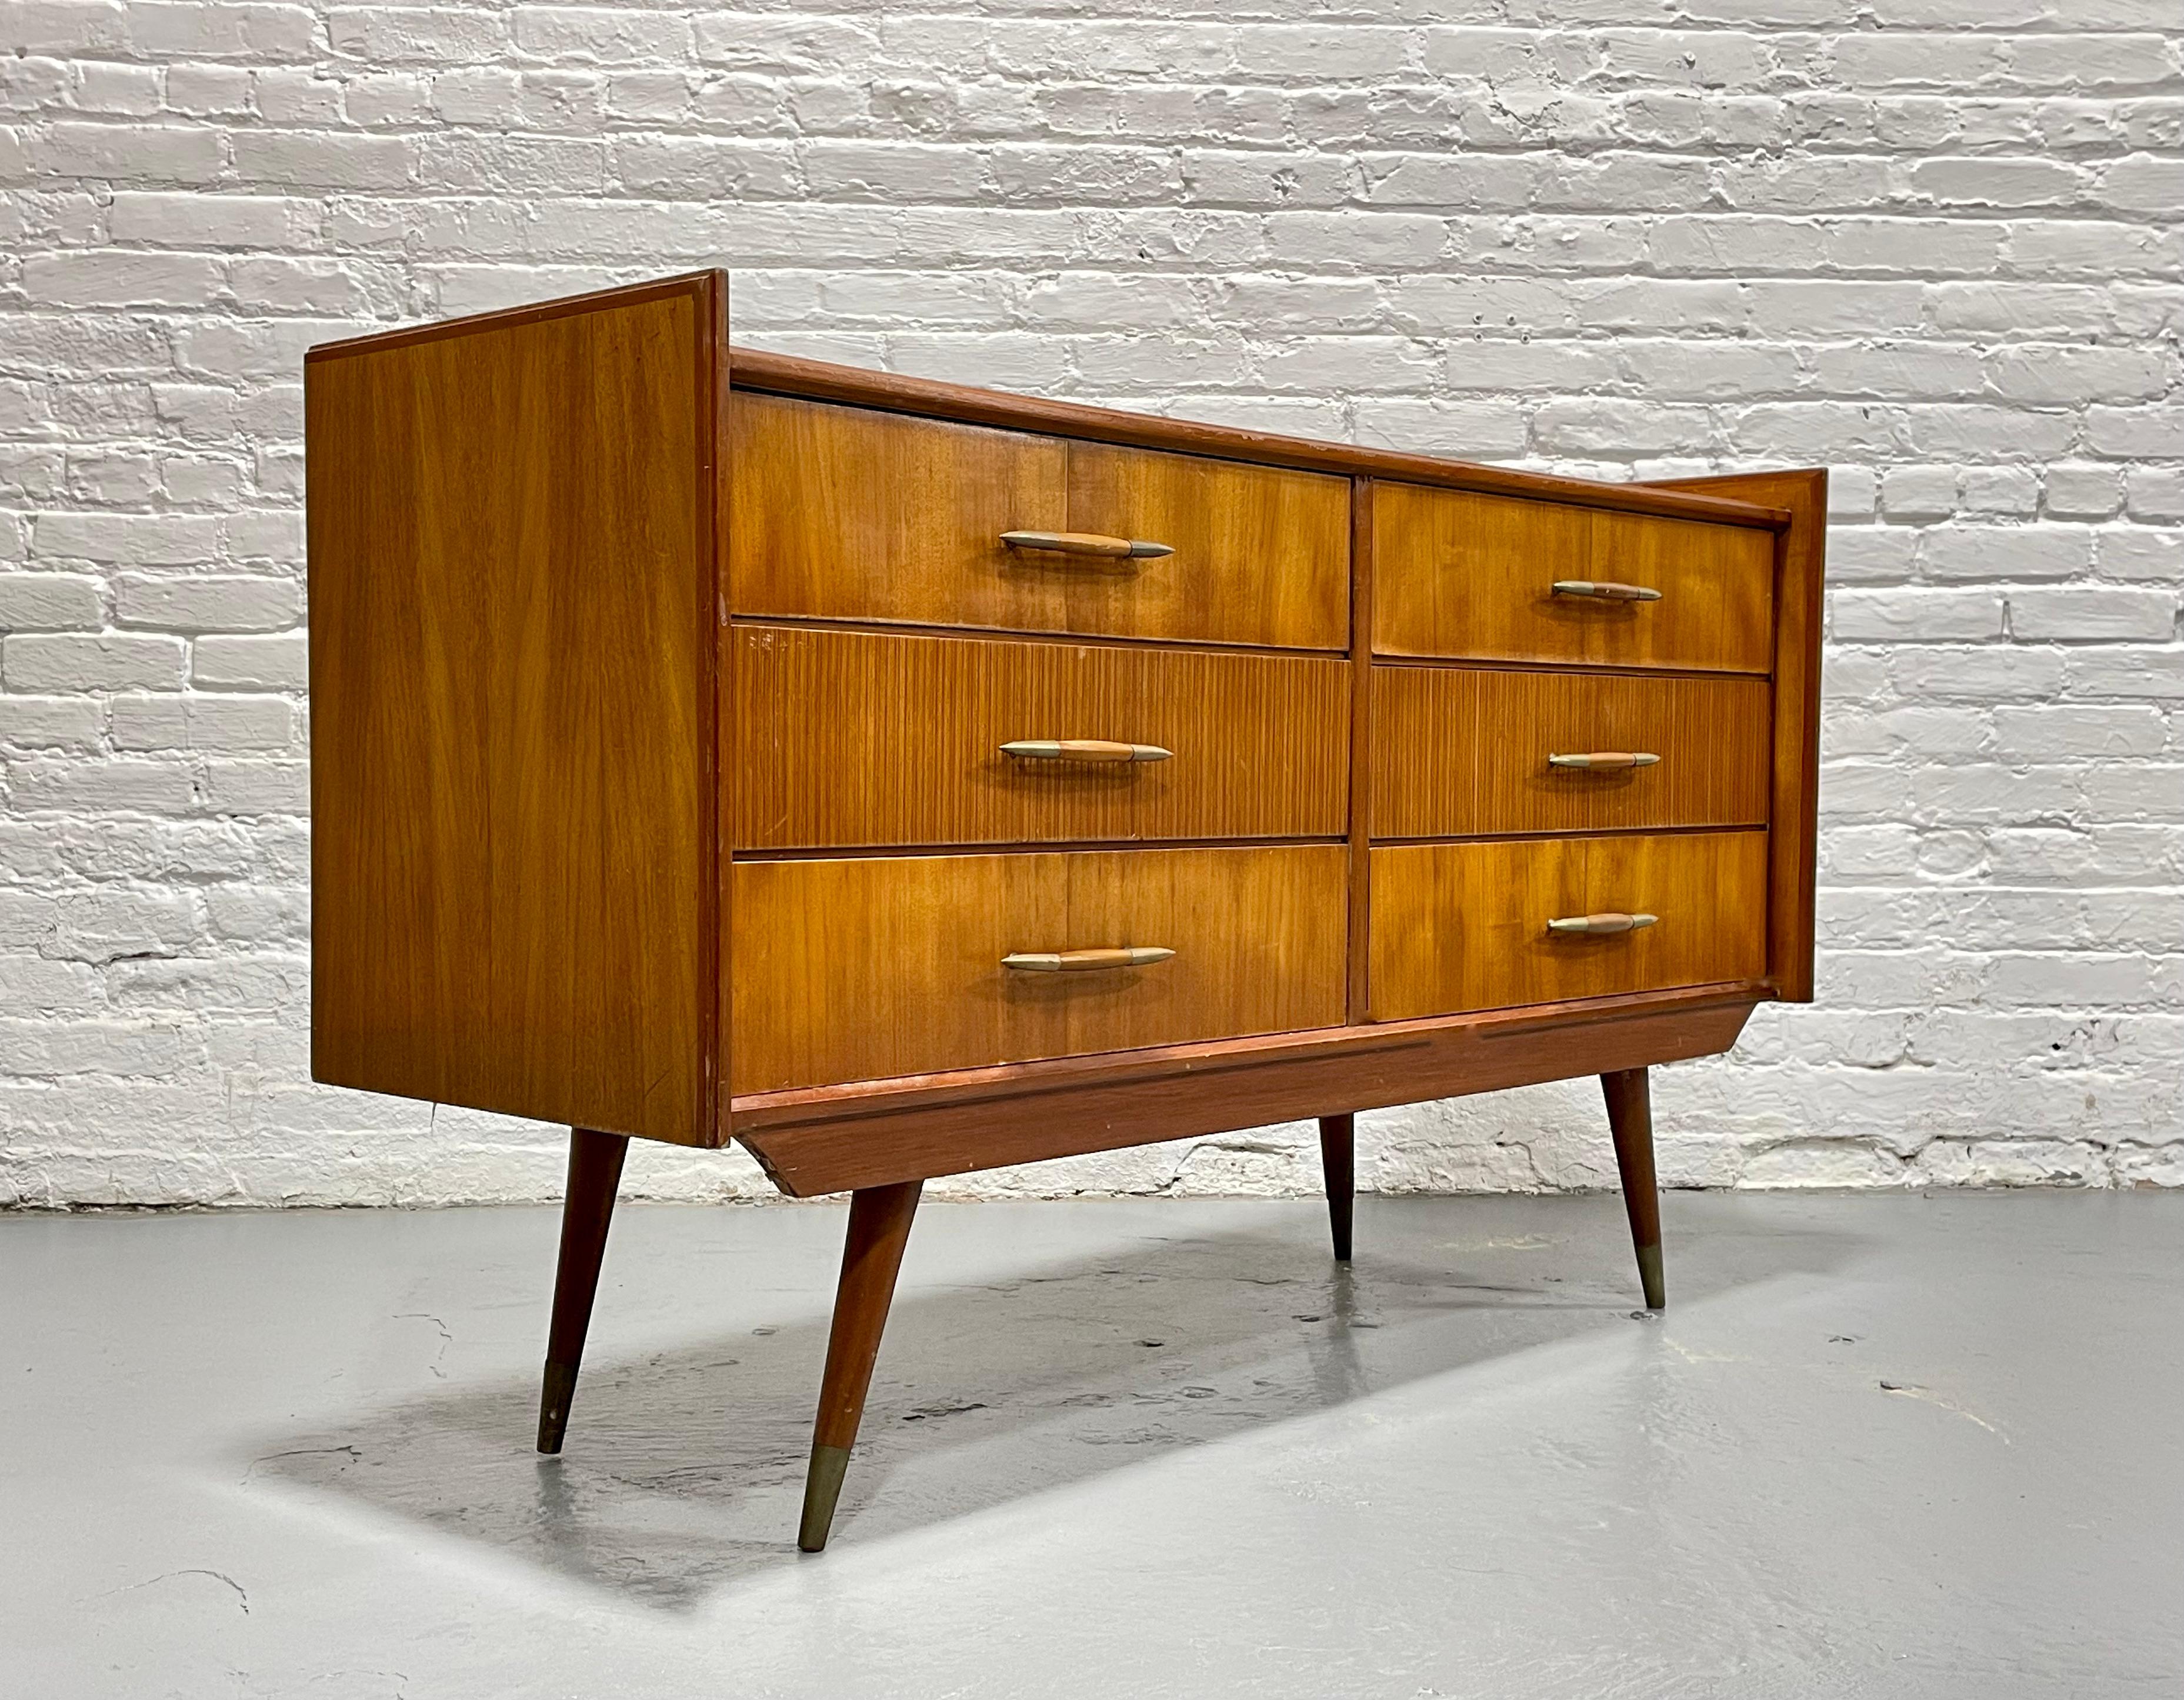 Truly Incredible Mid Century Modern Six Drawer Long Dresser, c. 1950’s. A rare example of Italian Mid Century Modern design with lovely butterscotch coloring. This finely crafted dresser features the most incredible wood grains and gorgeous long